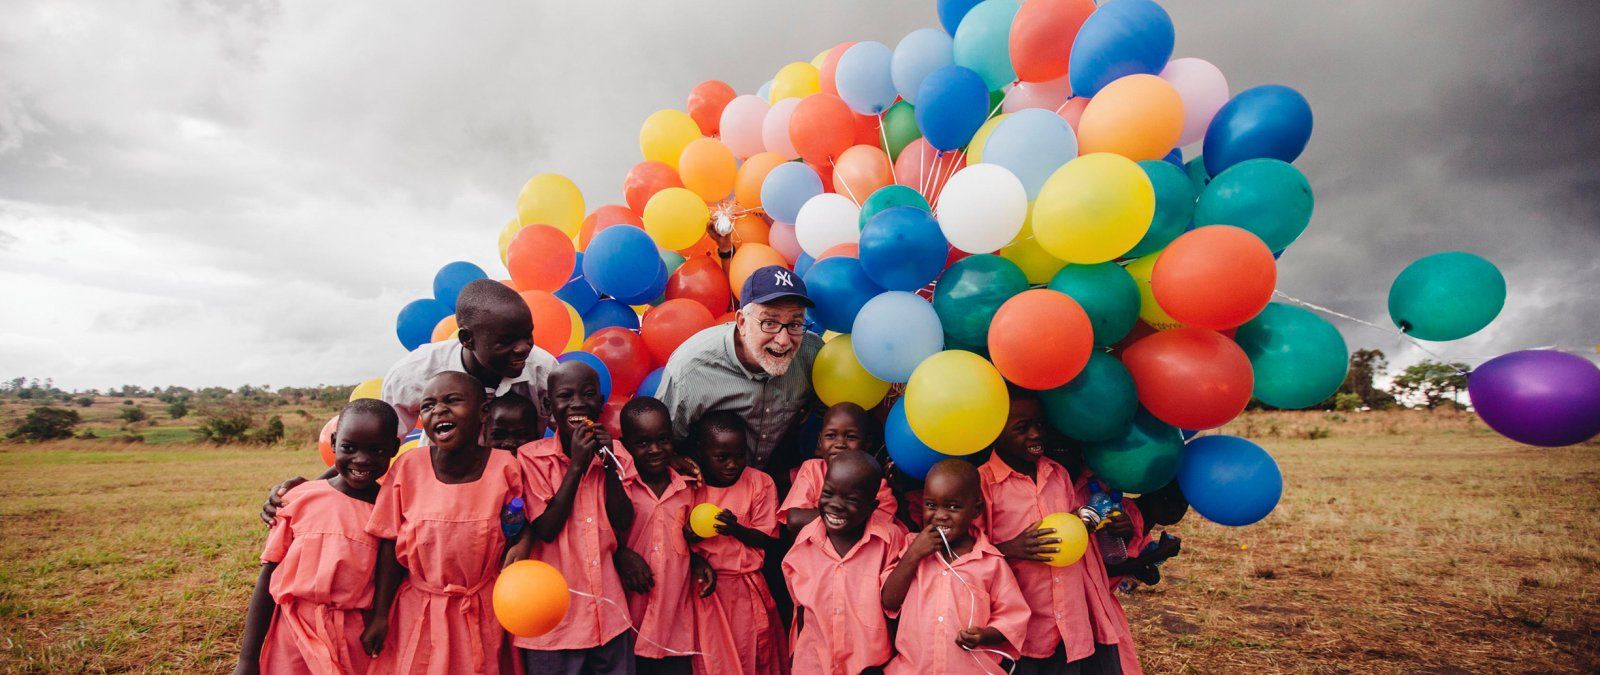 Bob Goff brings a large collection of colorful balloons to his Love Does students in Uganda